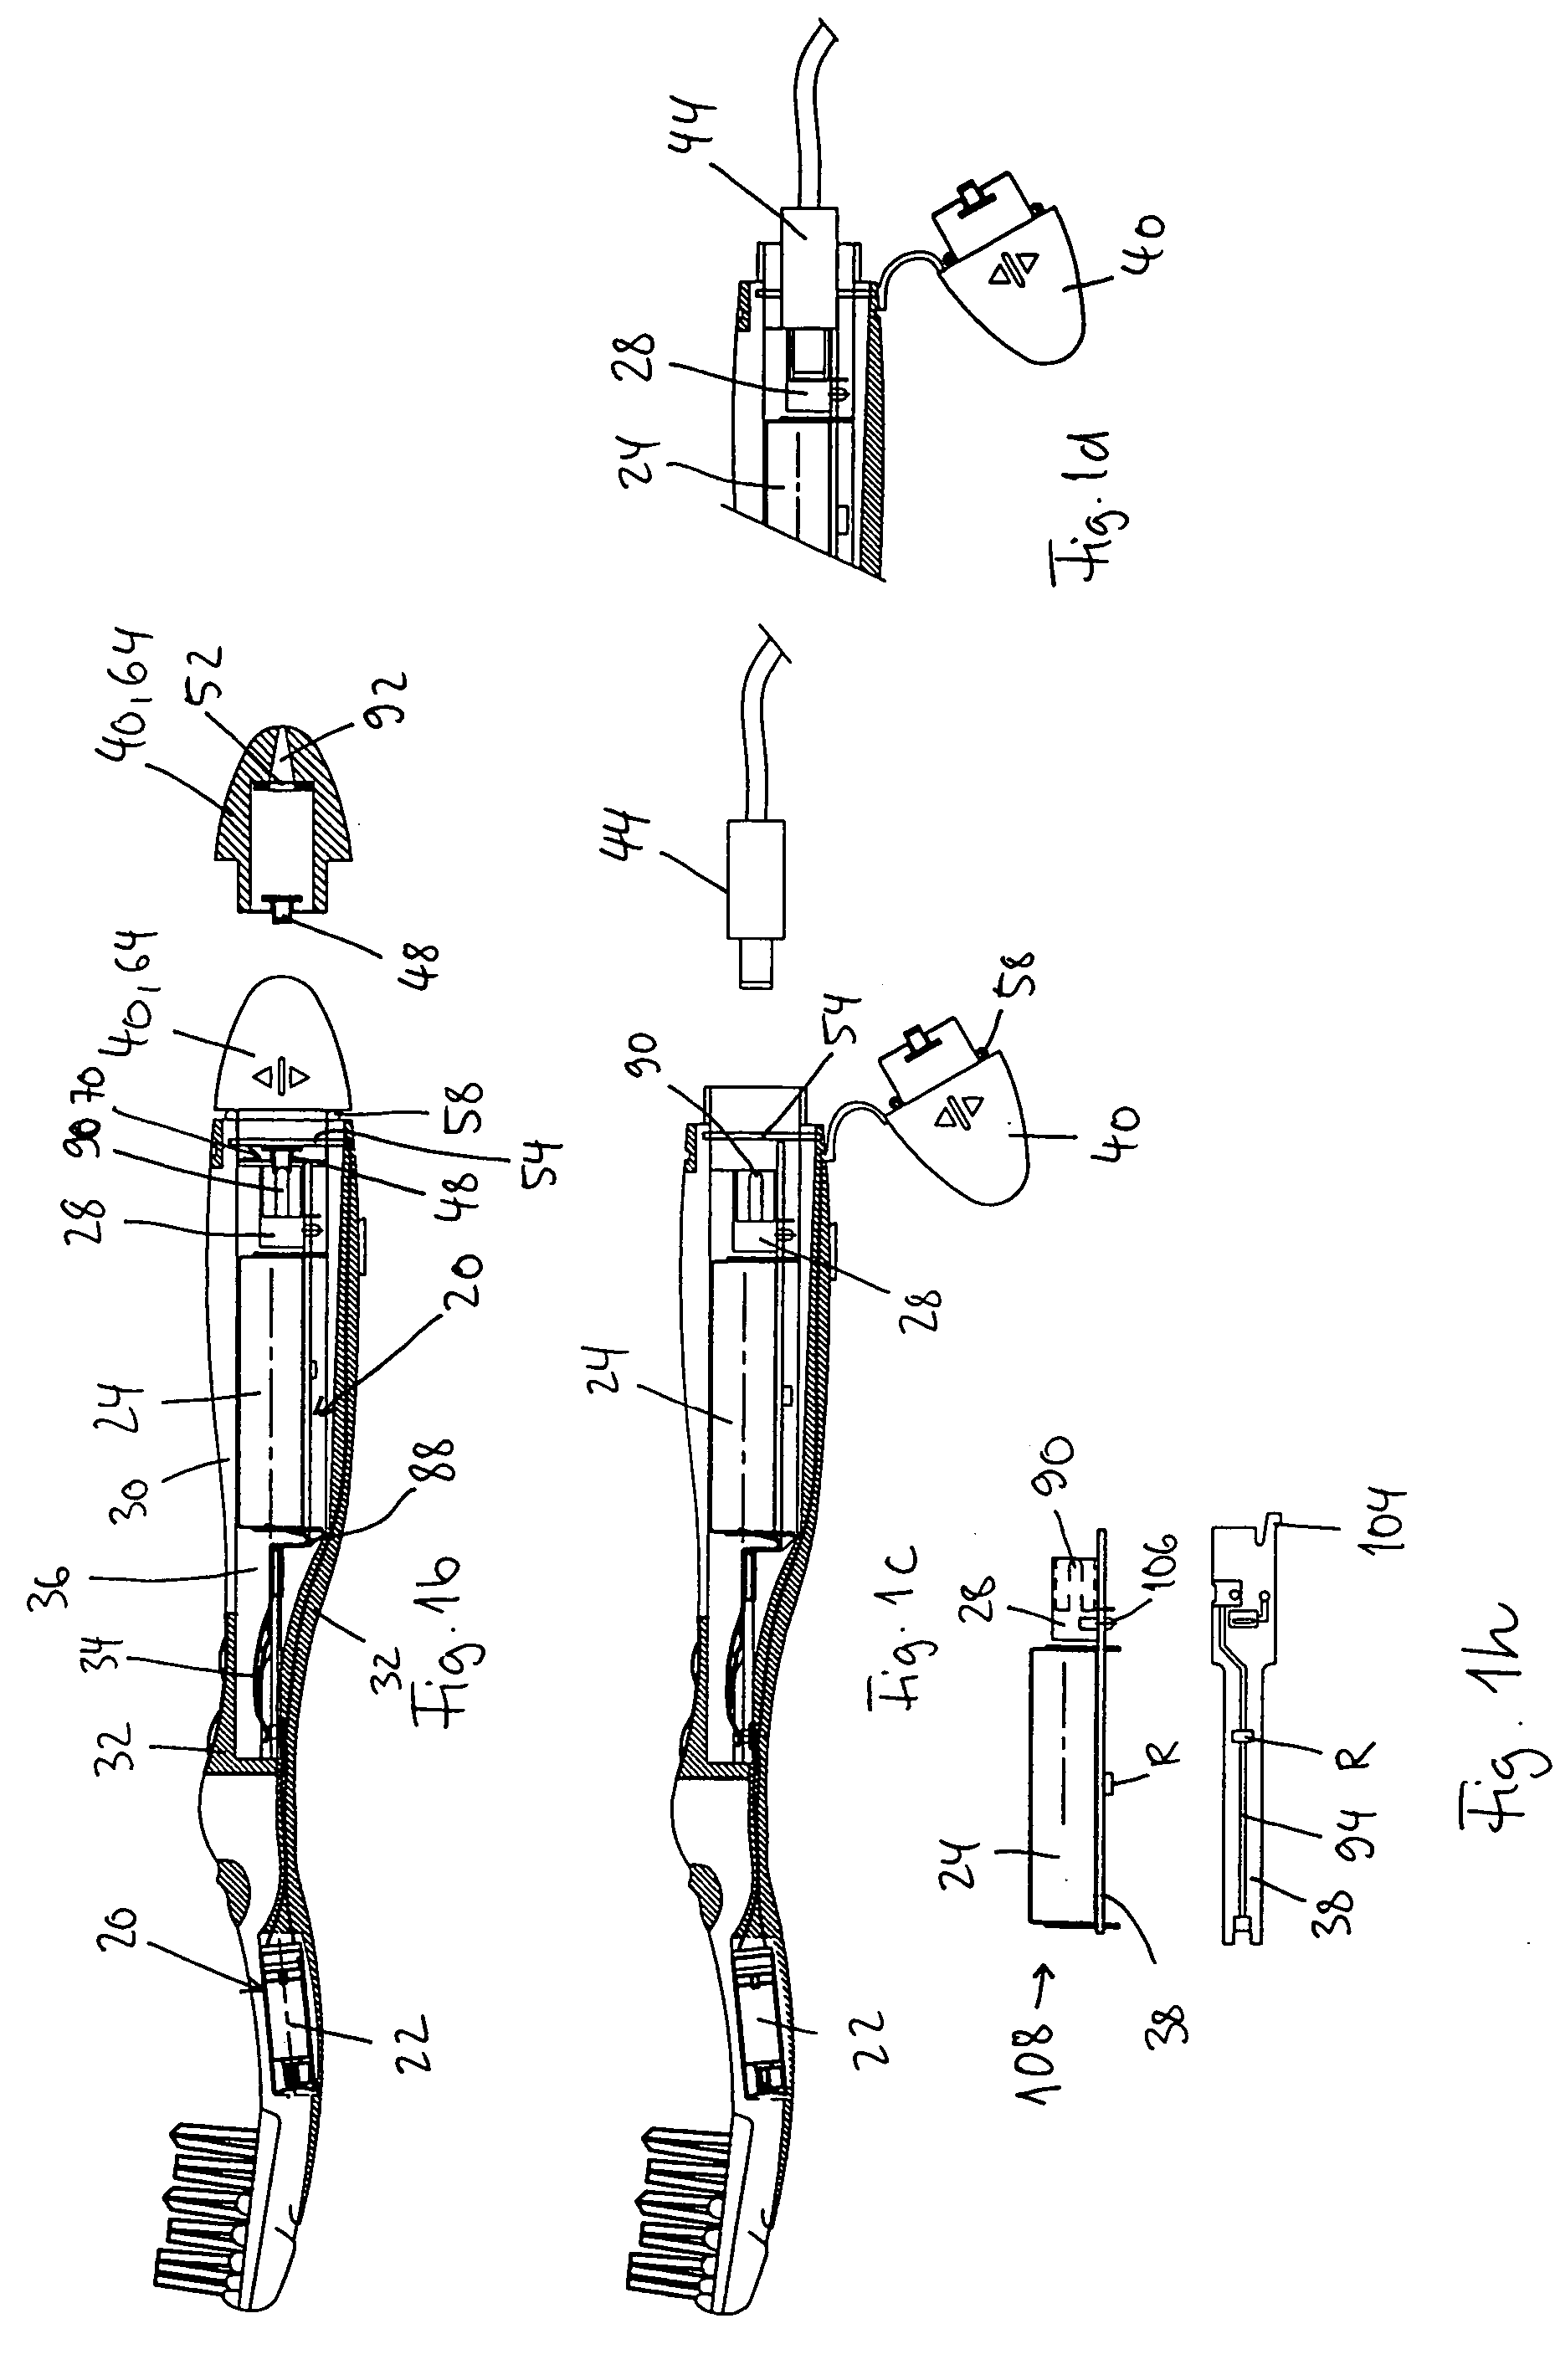 Toothbrush and process for producing the same